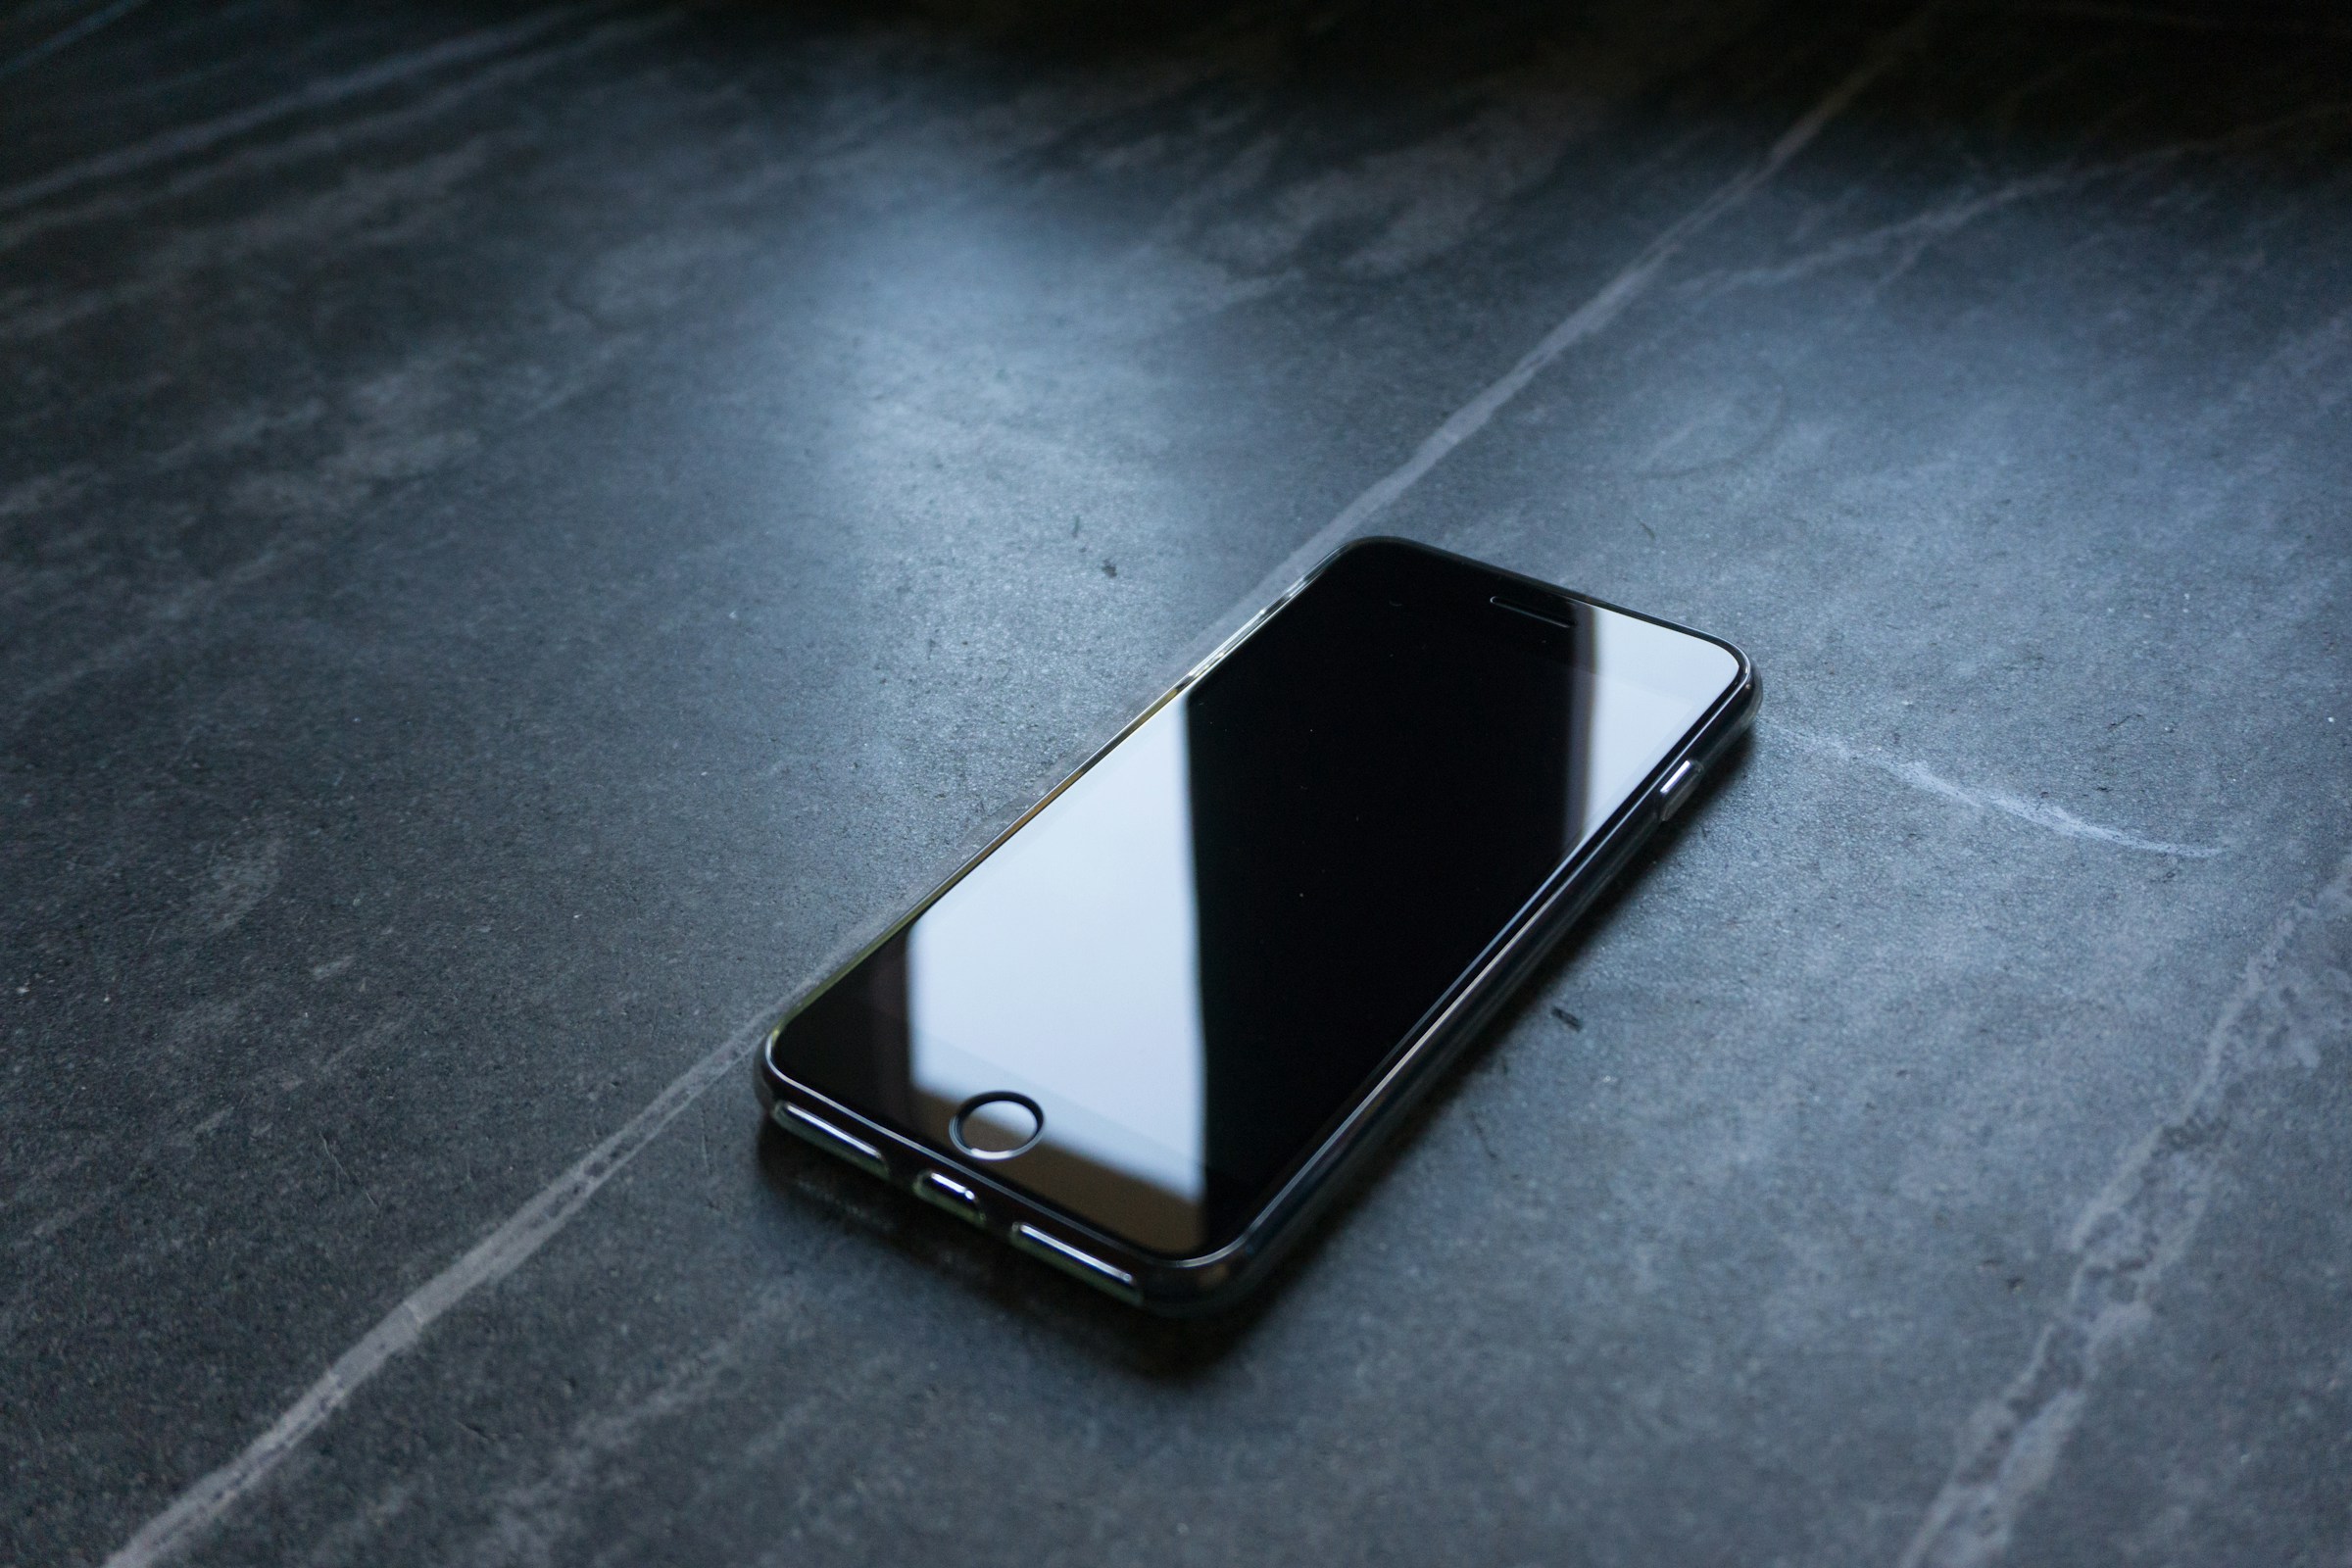 A black phone on a table | Source: Unsplash